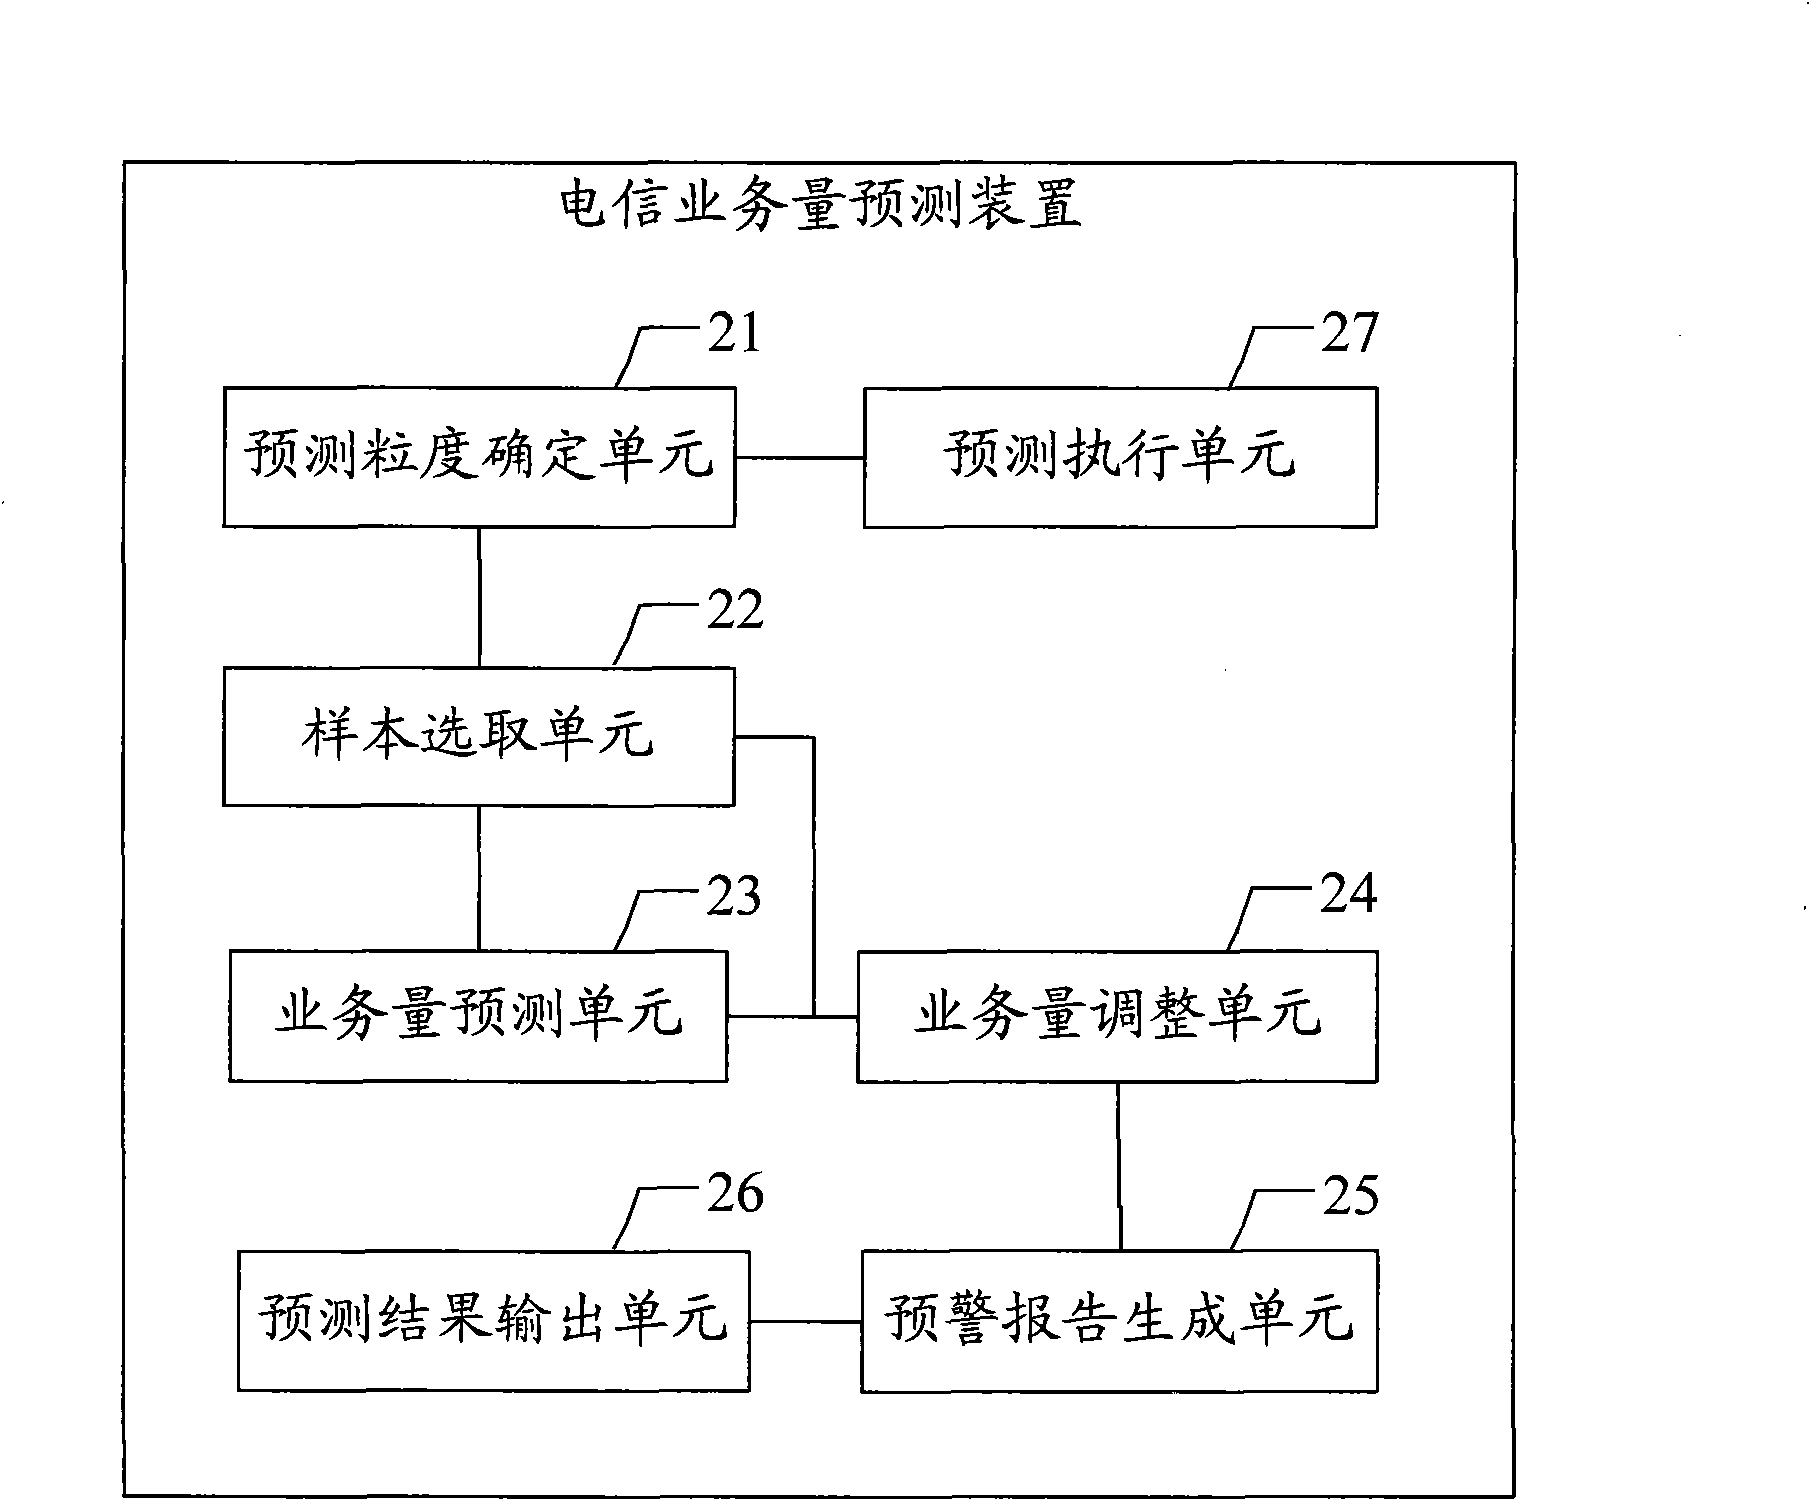 Method and device for predicting telecom traffic